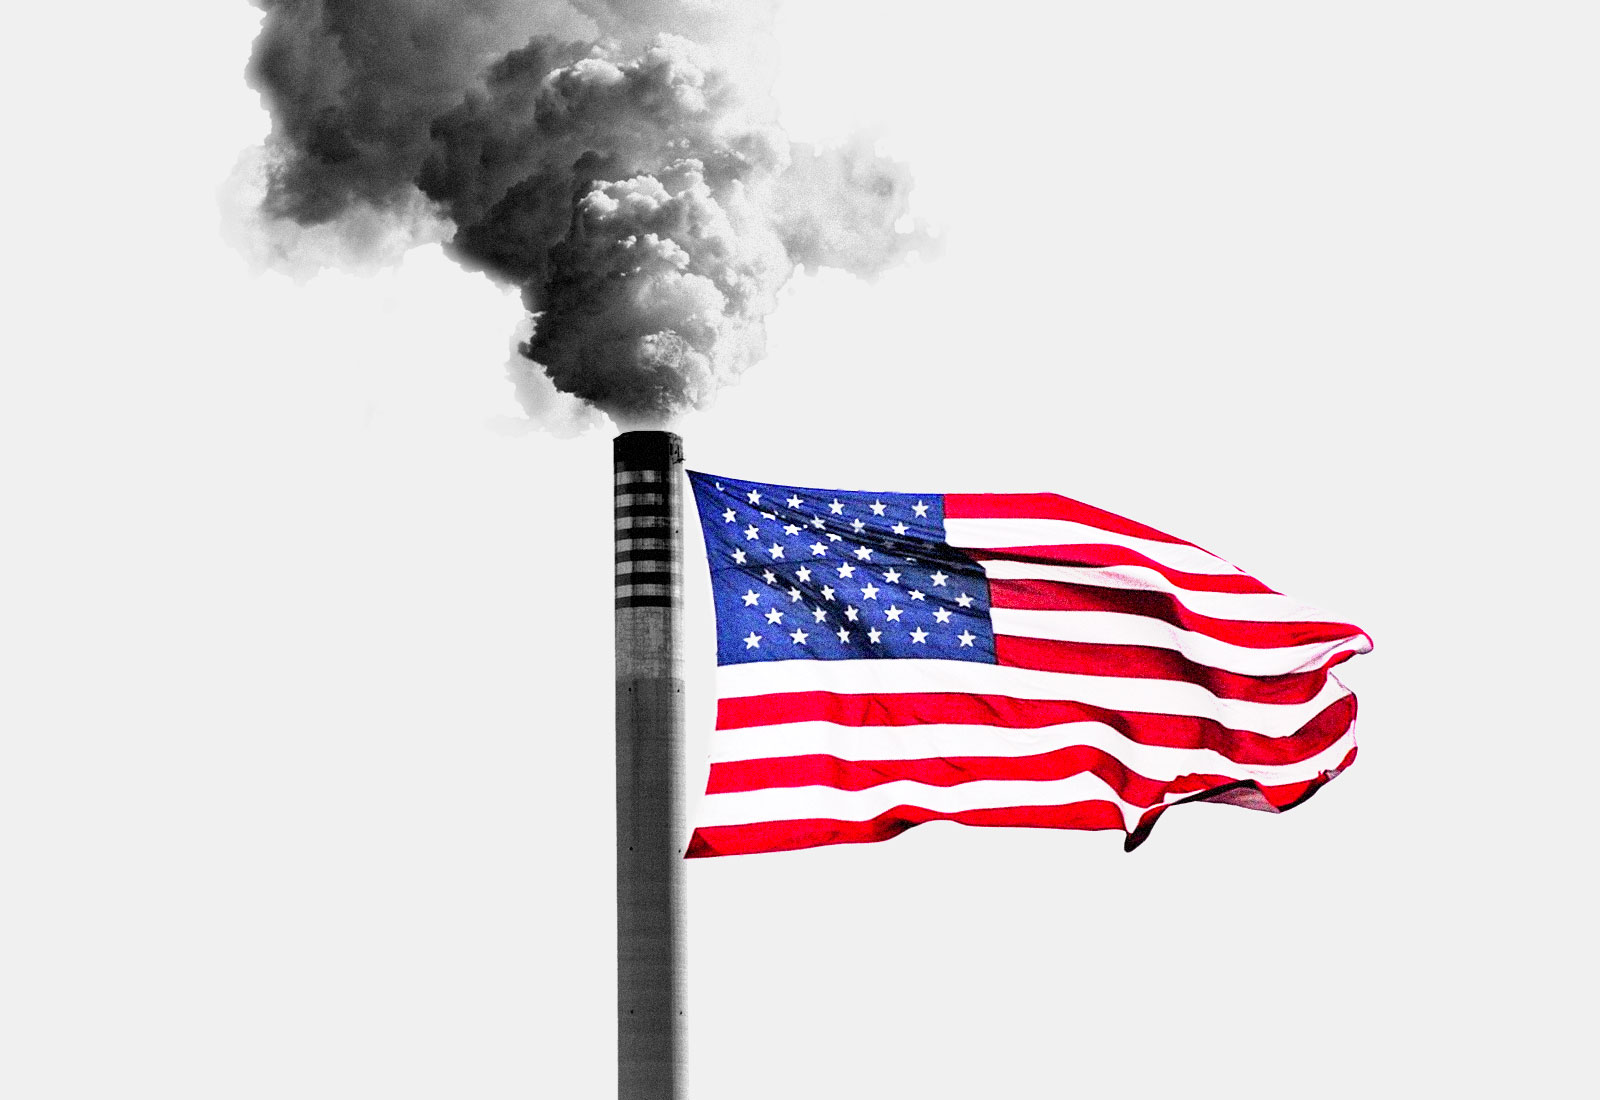 American flag attached to a smokestack